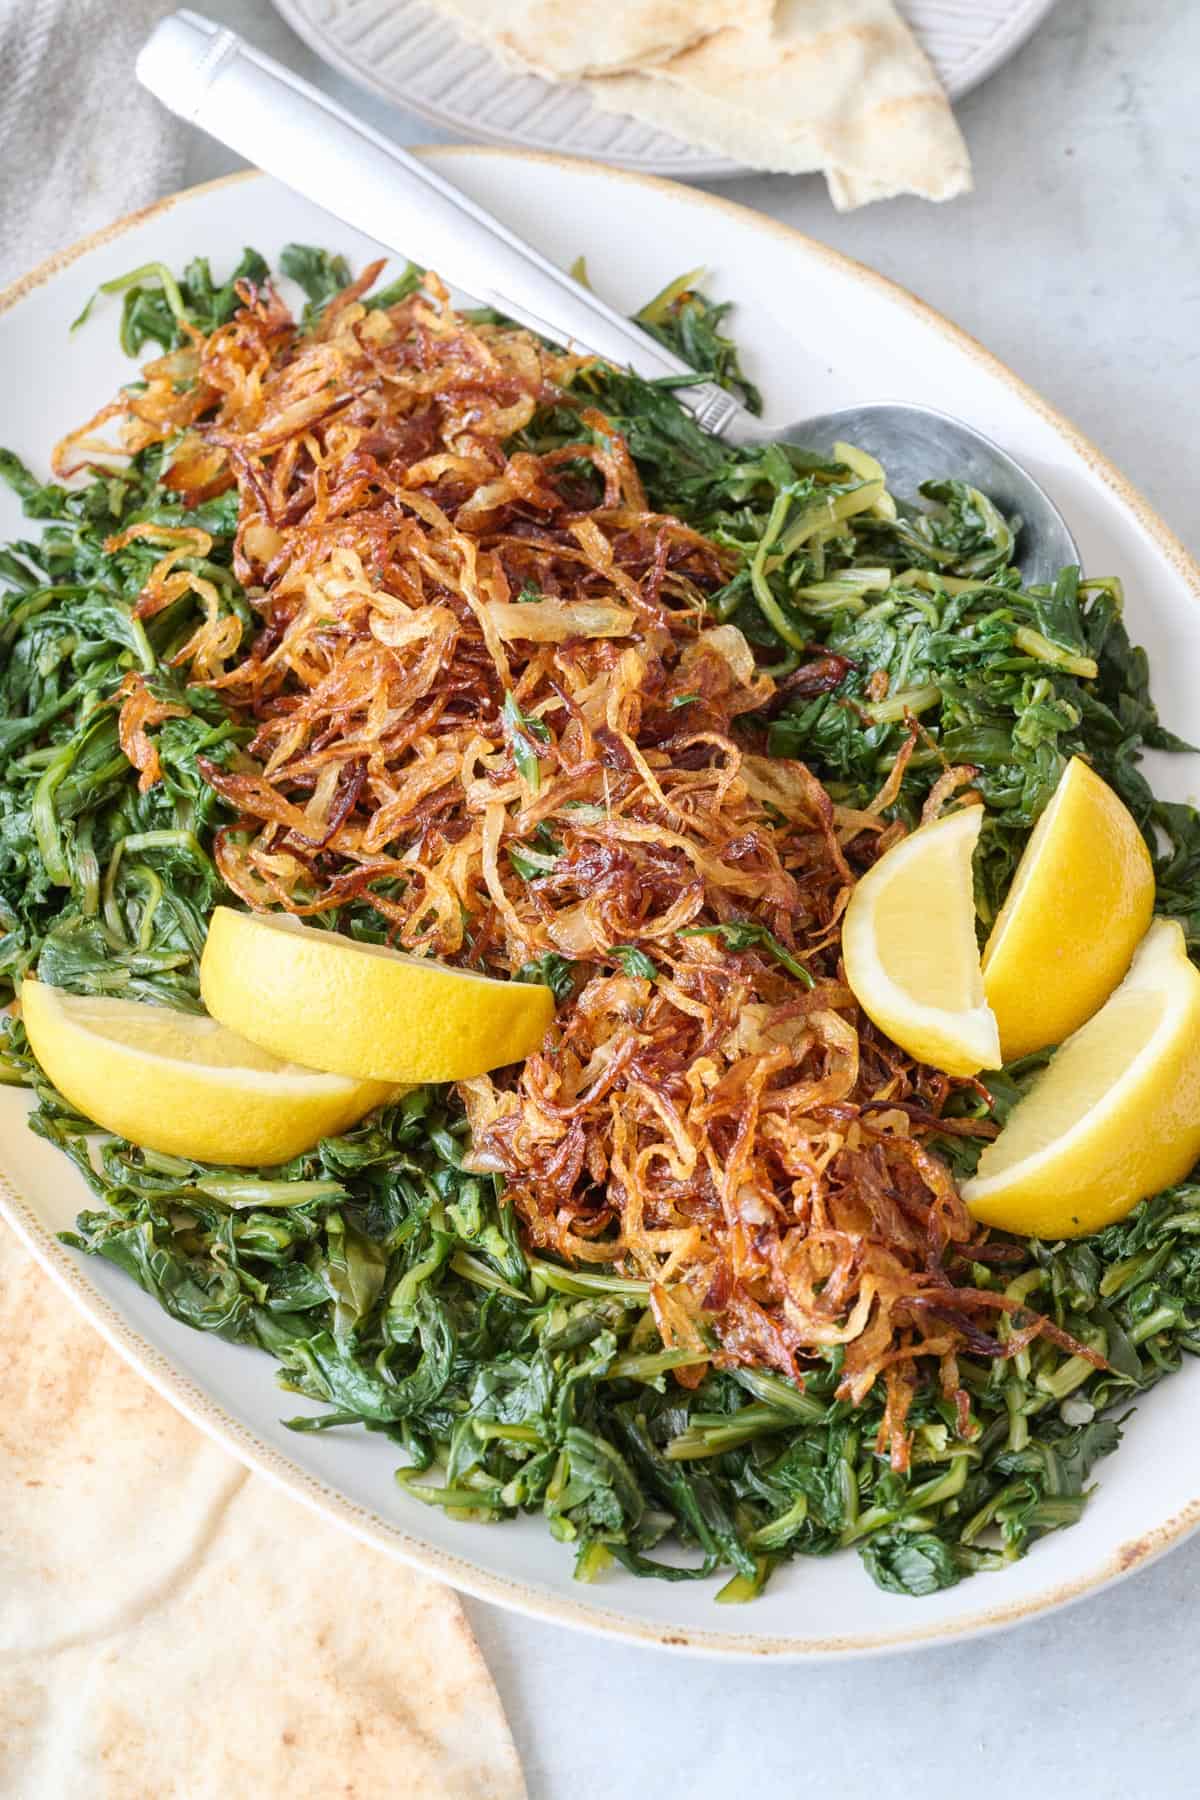 Platter full of cooked dandelion greens with crispy onions and lemon wedges.